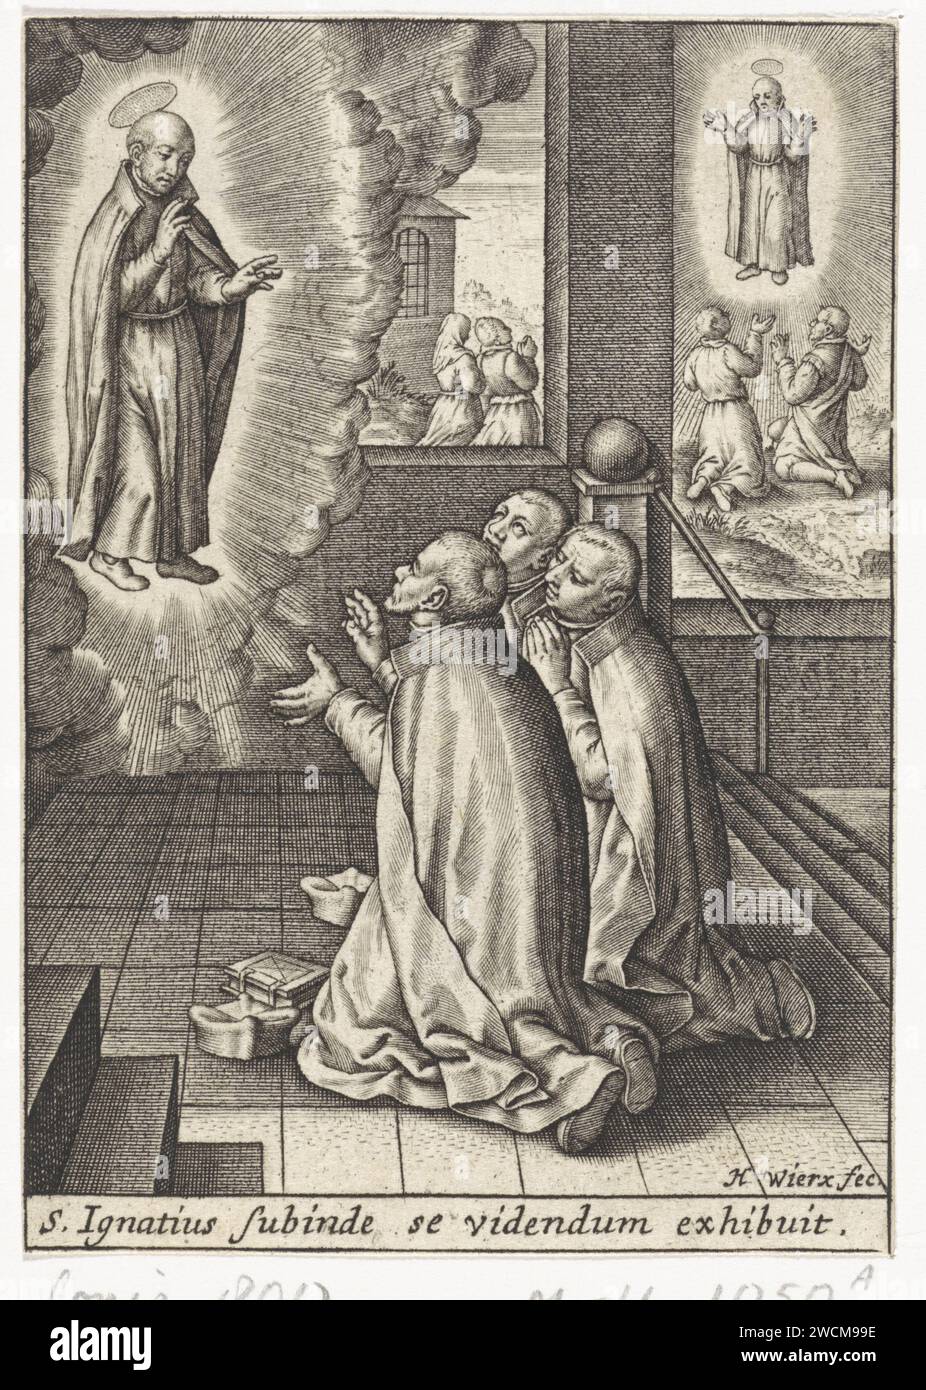 Appearance of Ignatius van Loyola to three Jesuiets, Hieronymus Wierix, After 1613 - 1619 print After his death, Ignatius van Loyola appears on three Jesuiets in a church. He appears in the background to believers who look up in worship. In the margin a caption in Latin. Antwerp paper engraving post-mortem occurrences  St. Ignatius - posthumous deeds, appearances of male saints Stock Photo